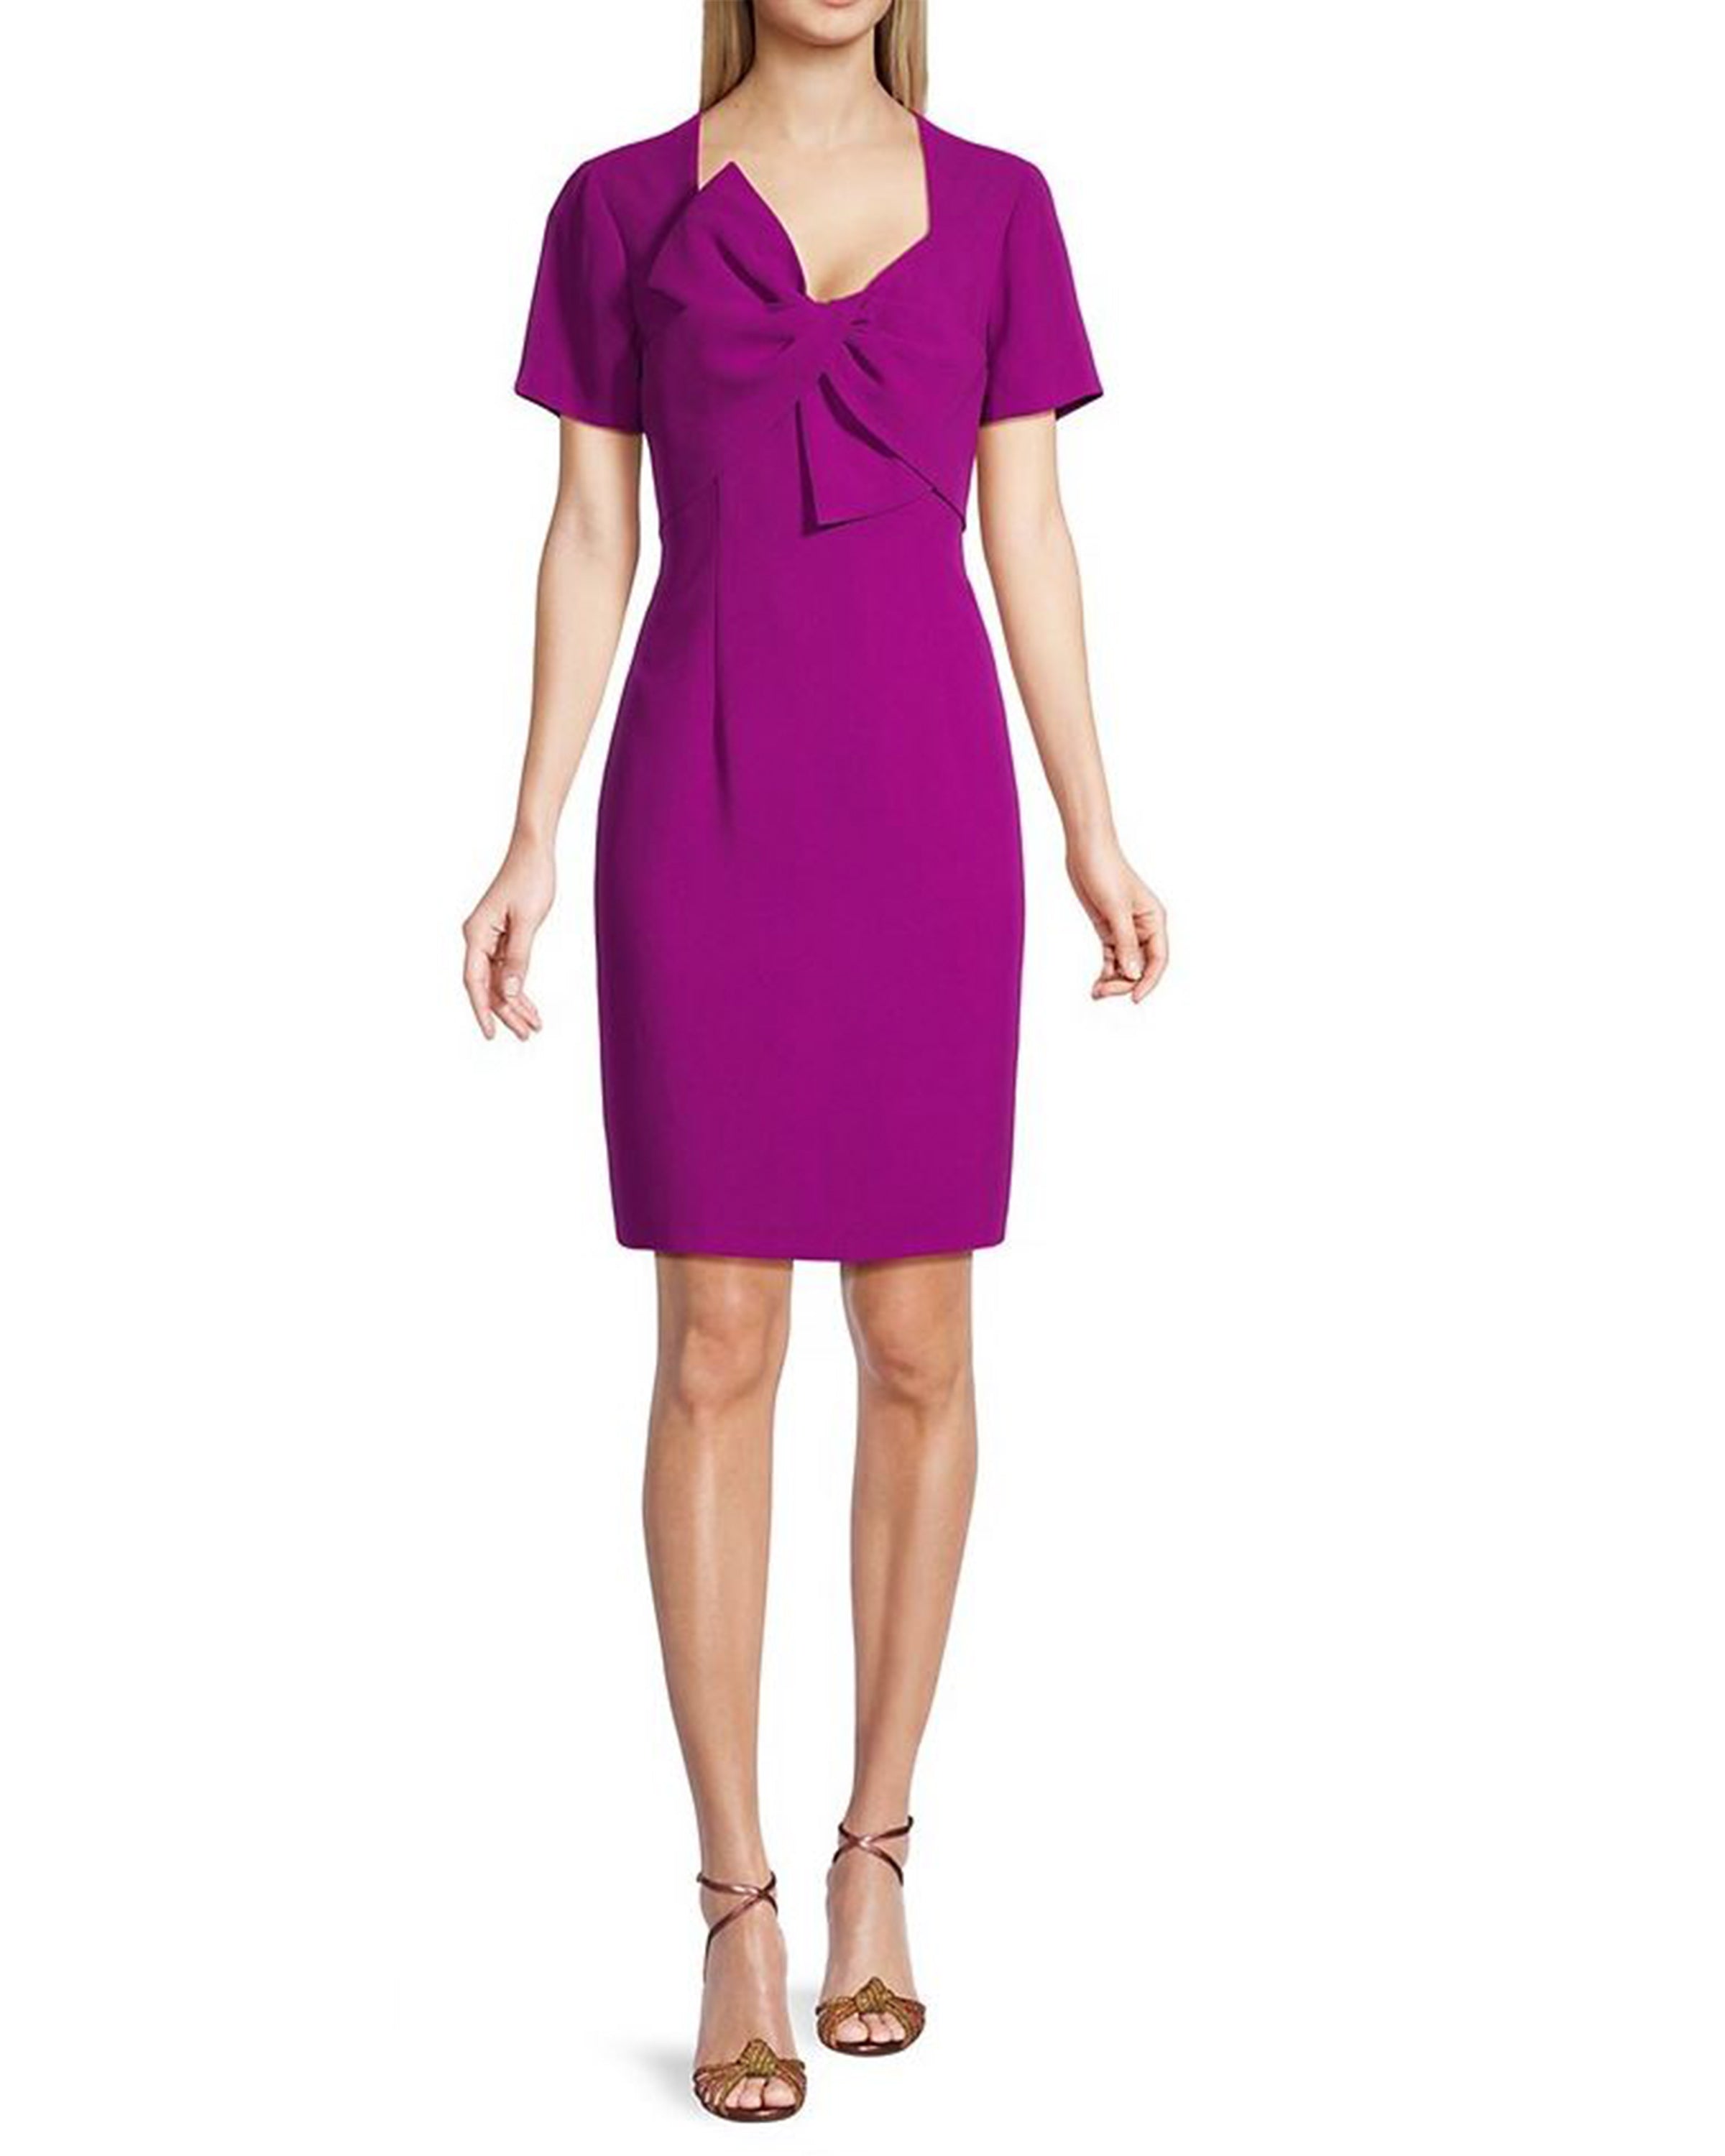 Bow Detail Crepe Sheath Dress in Wine Berry